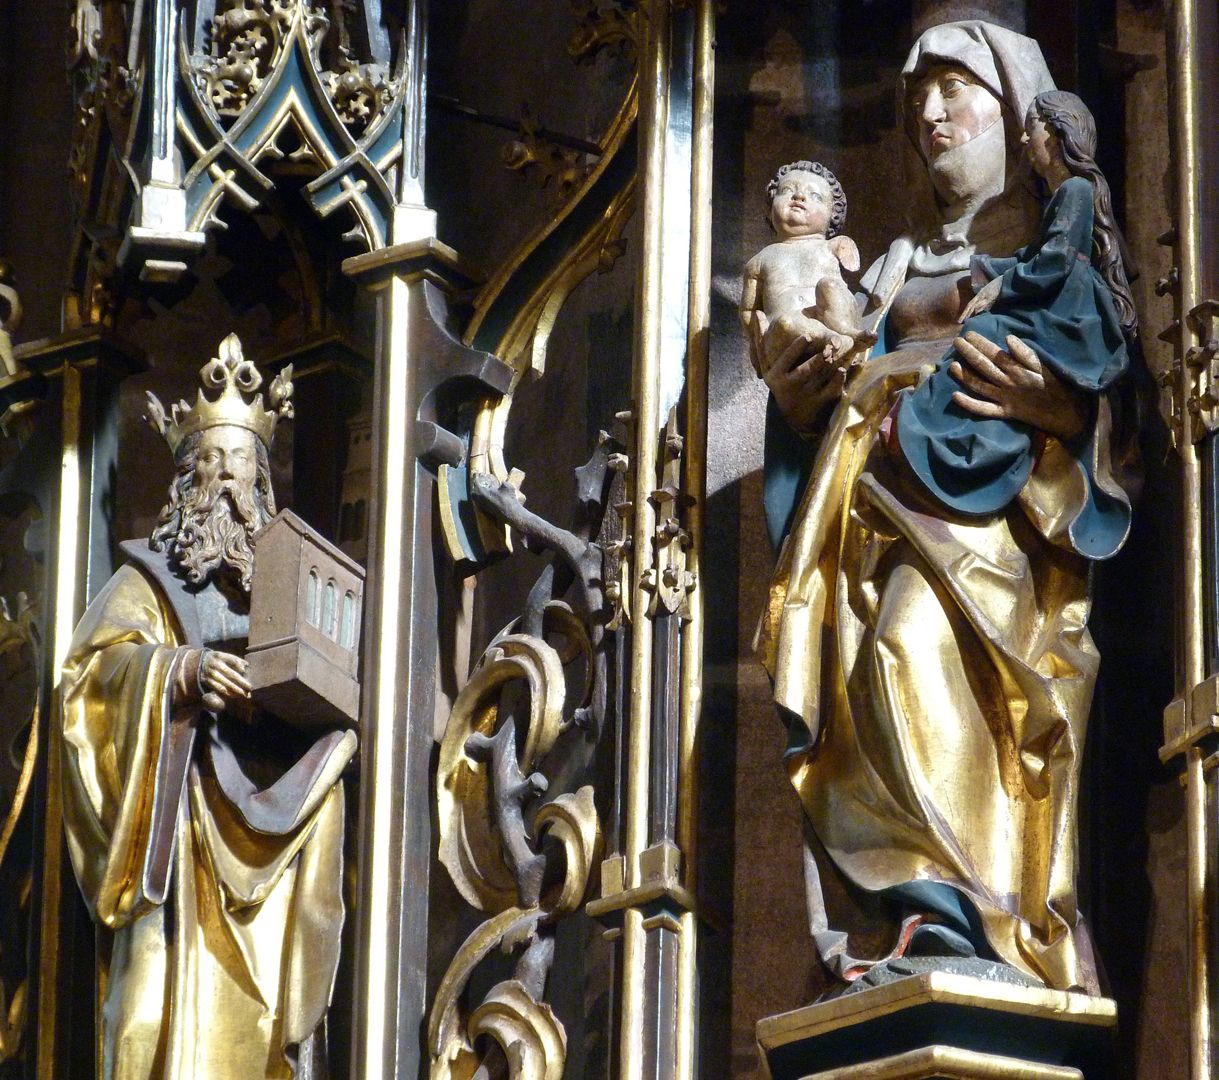 St. Anne´s Altar lower crowning structure, detailed view of Henry II and Mary with the infant Jesus.